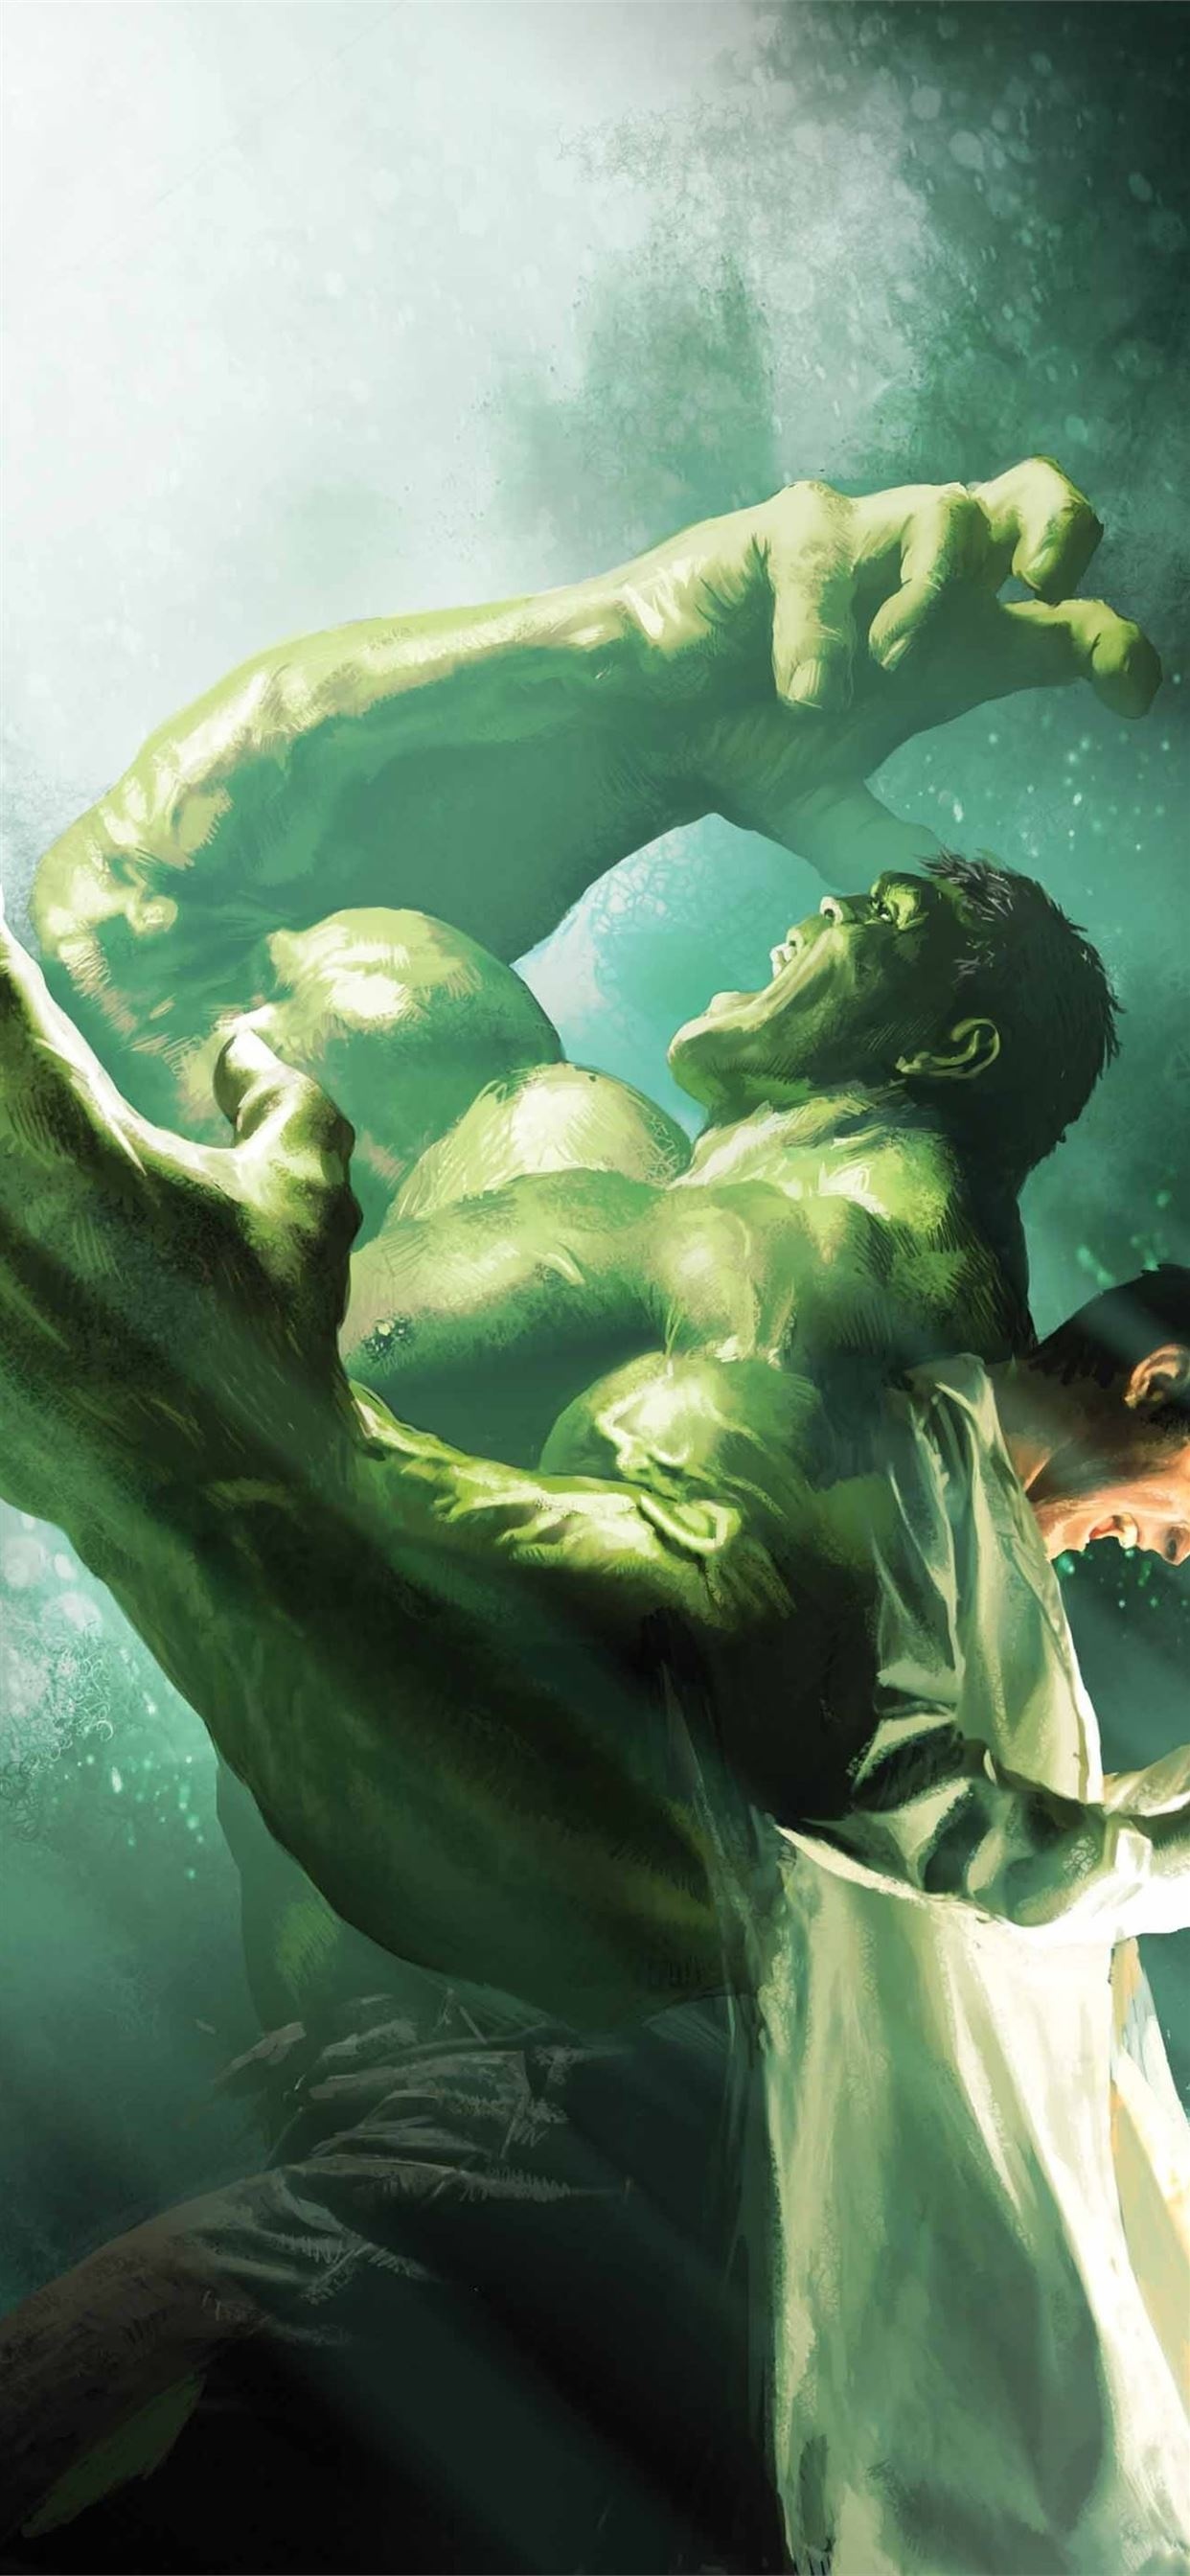 Cool Pictures Of The Incredible Hulk Wallpaper posted by Sarah Simpson 1250x2690